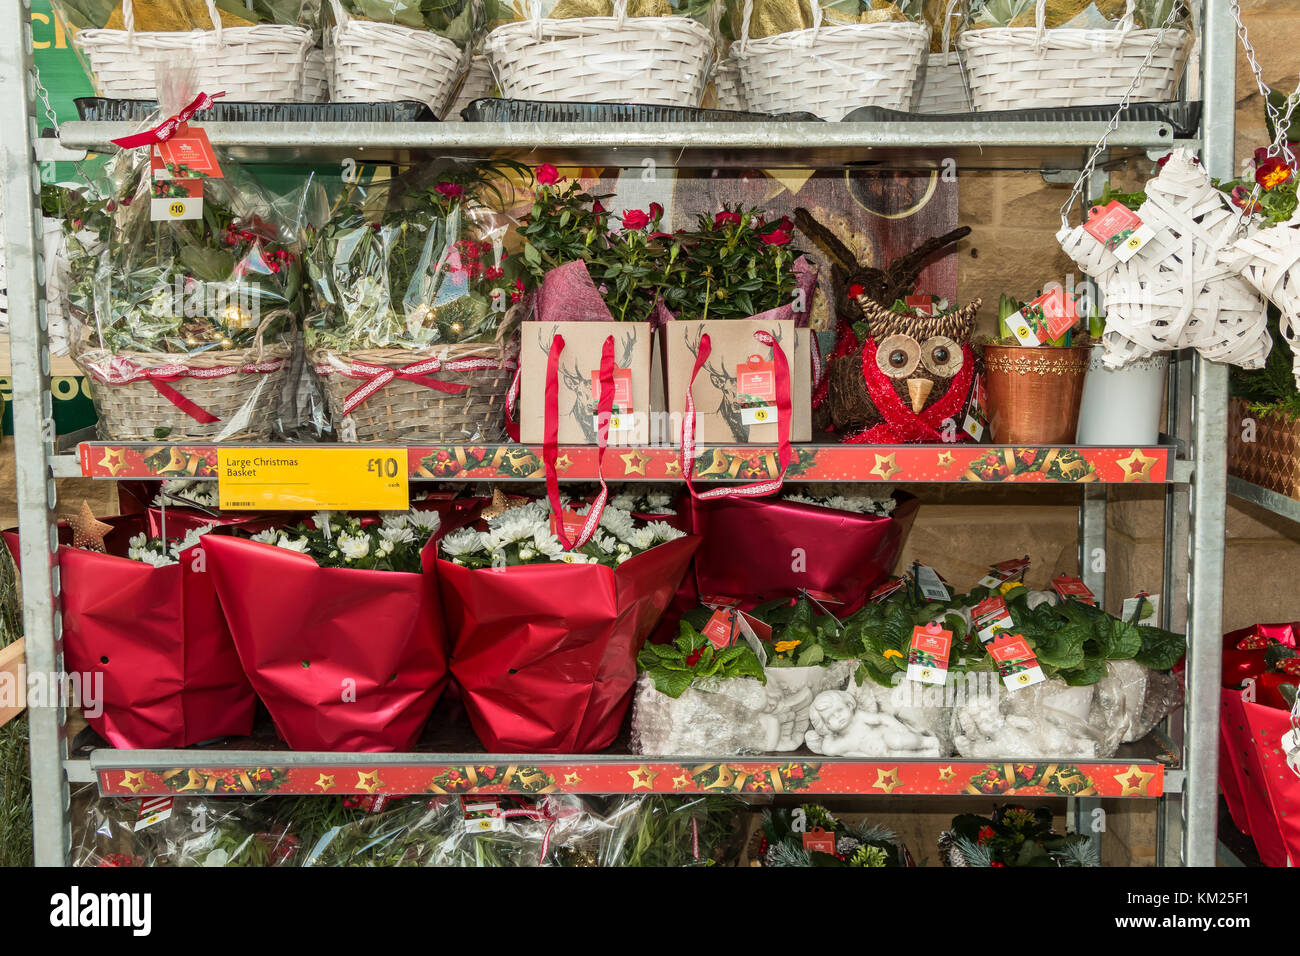 Christmas Gift Ideas and Inspiration from Morrisons